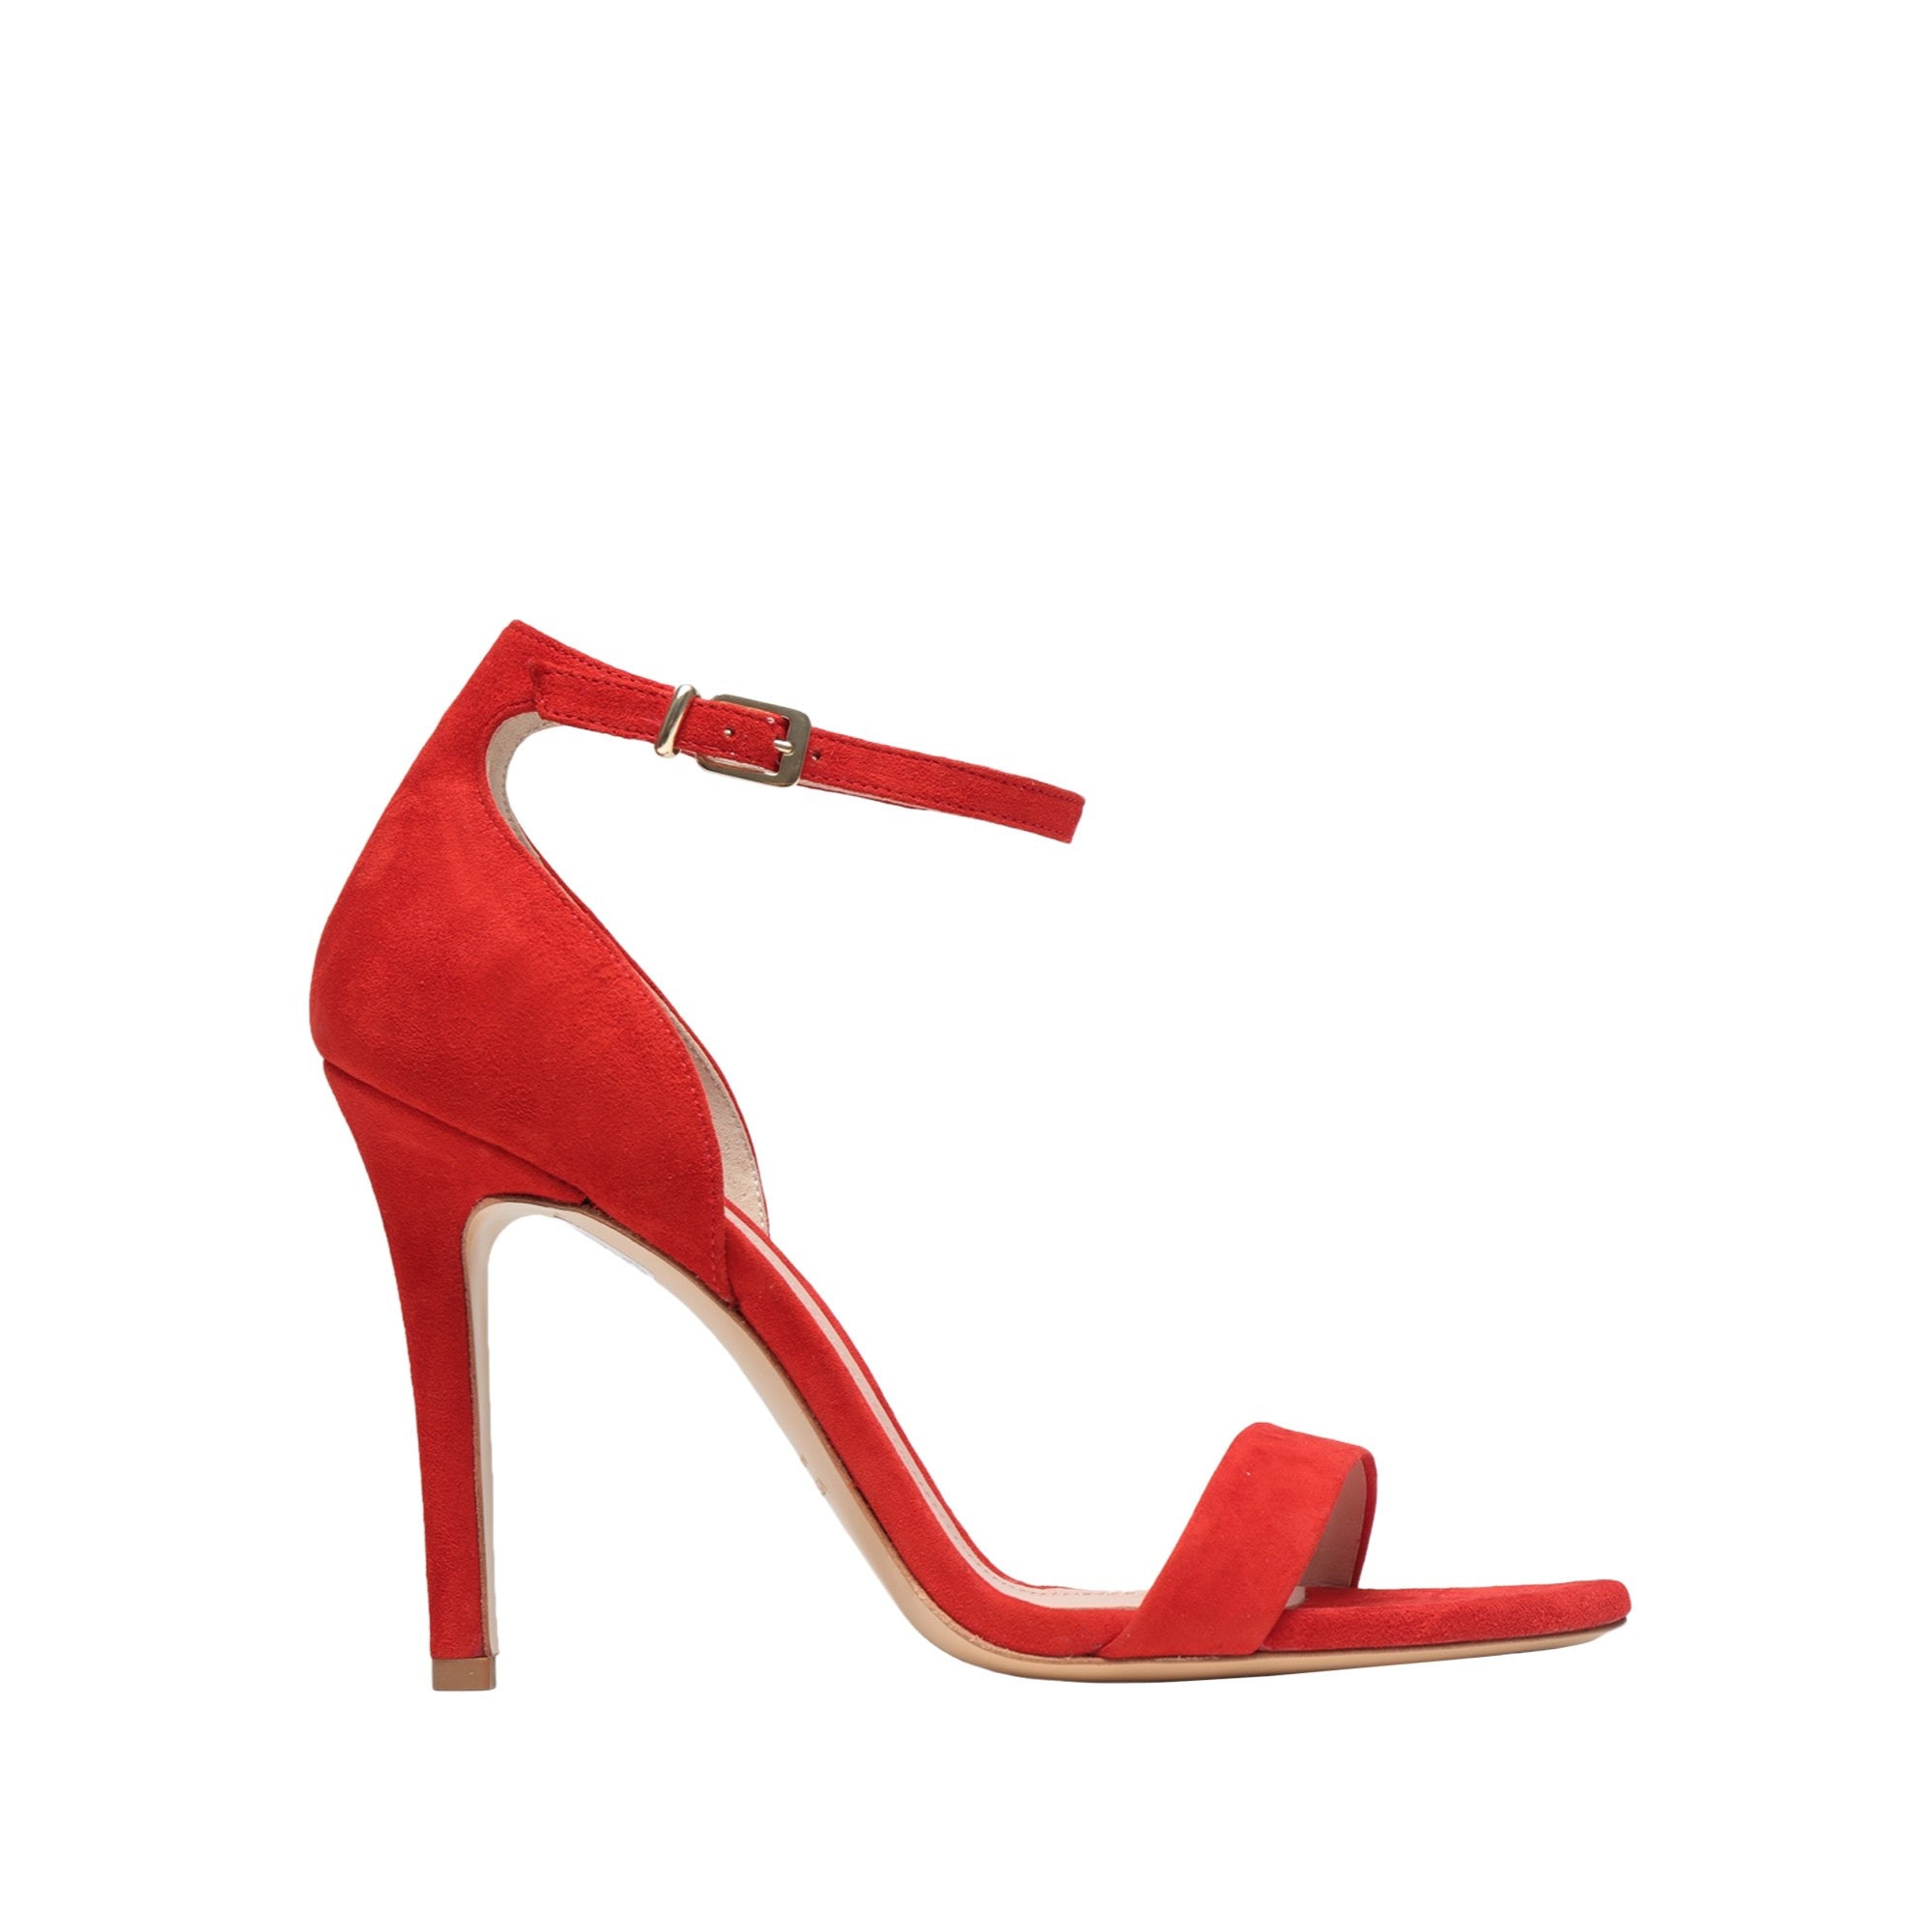 Women 8 By Yoox Sandals - Red